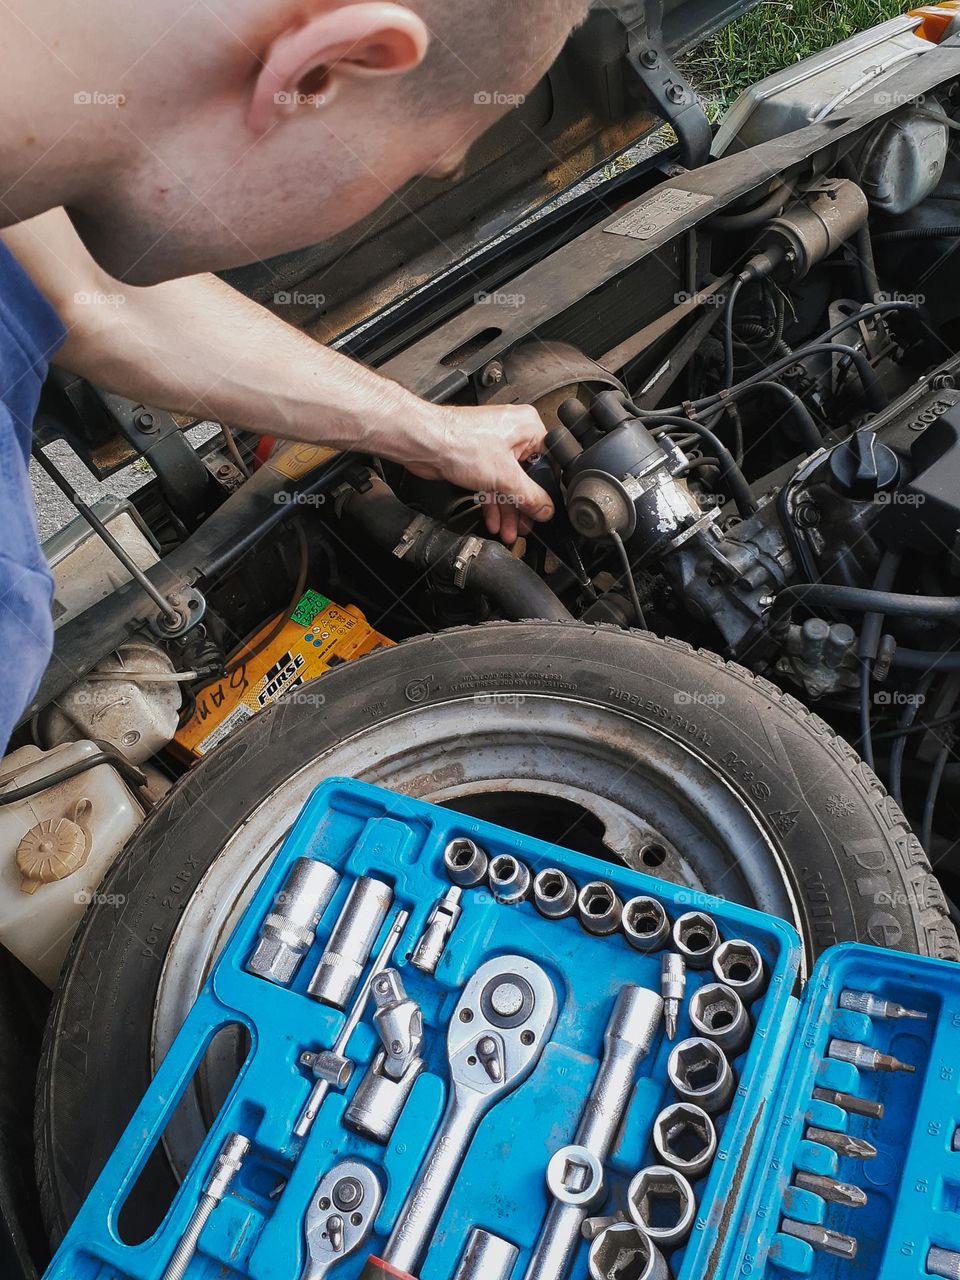 The mechanic conducts diagnostics under the hood of the old Slavuta